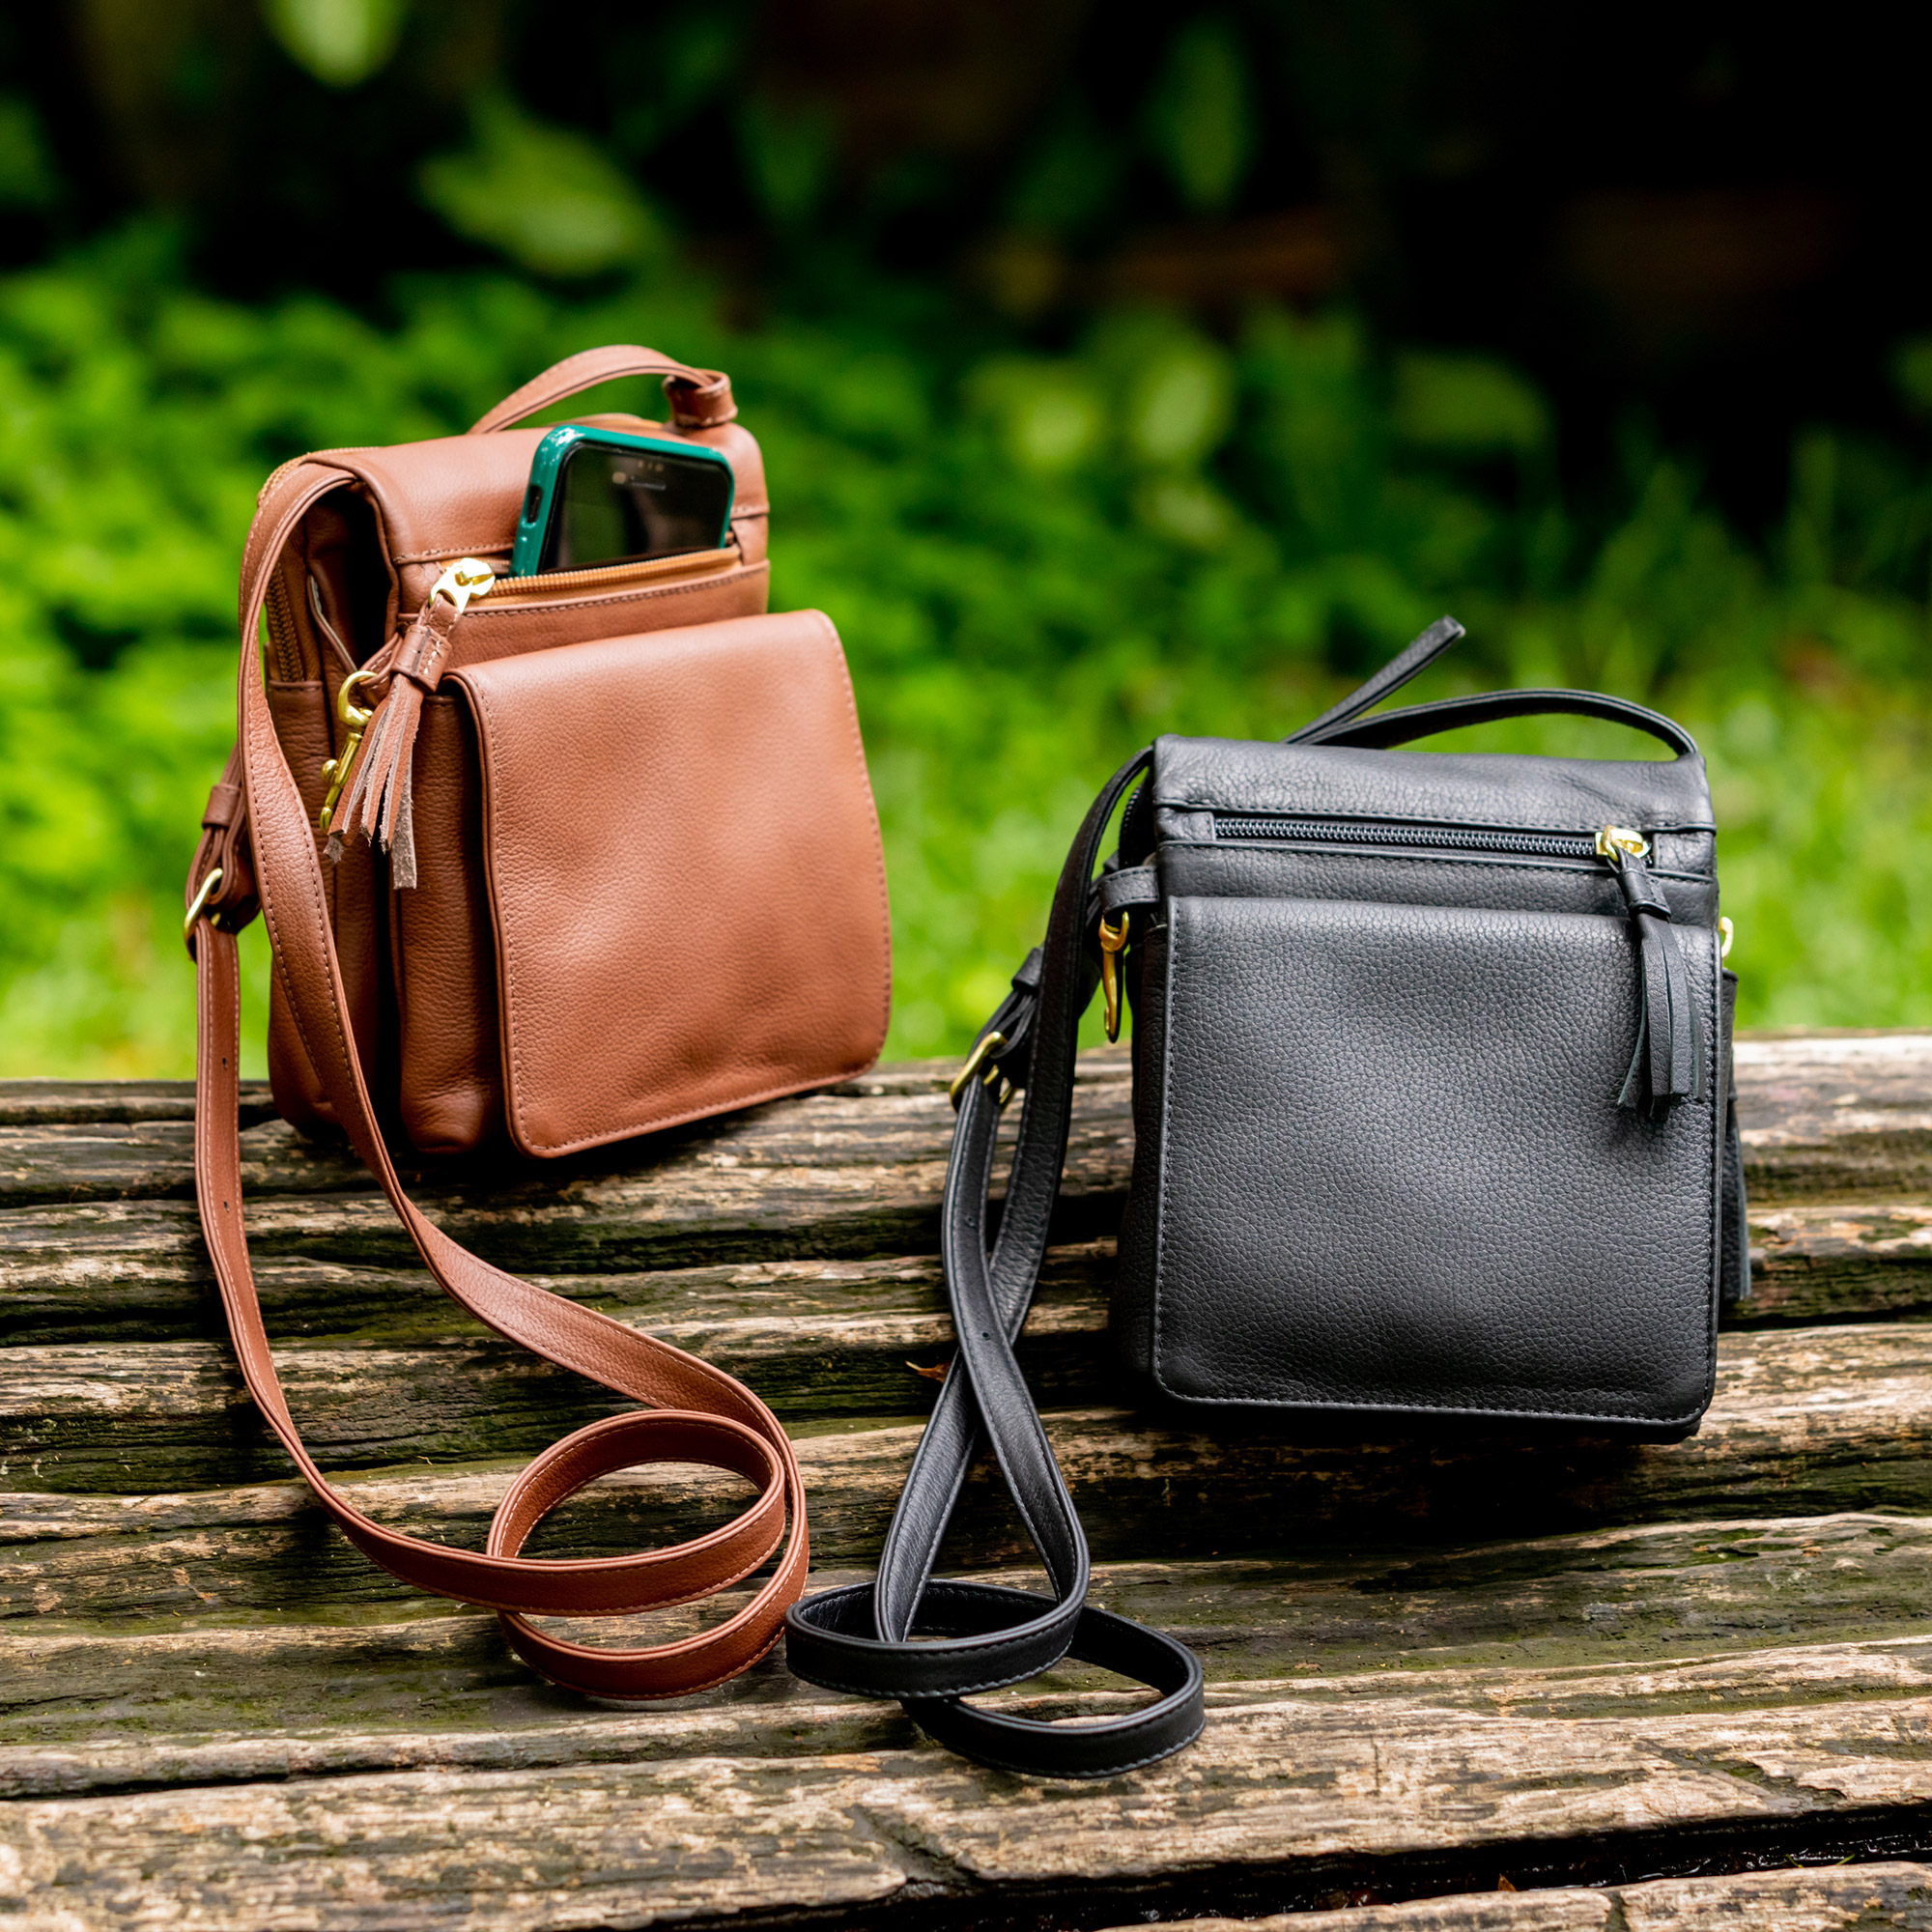 Up Your Bag Game With Gorgeous Slings, Leather Bags & More From